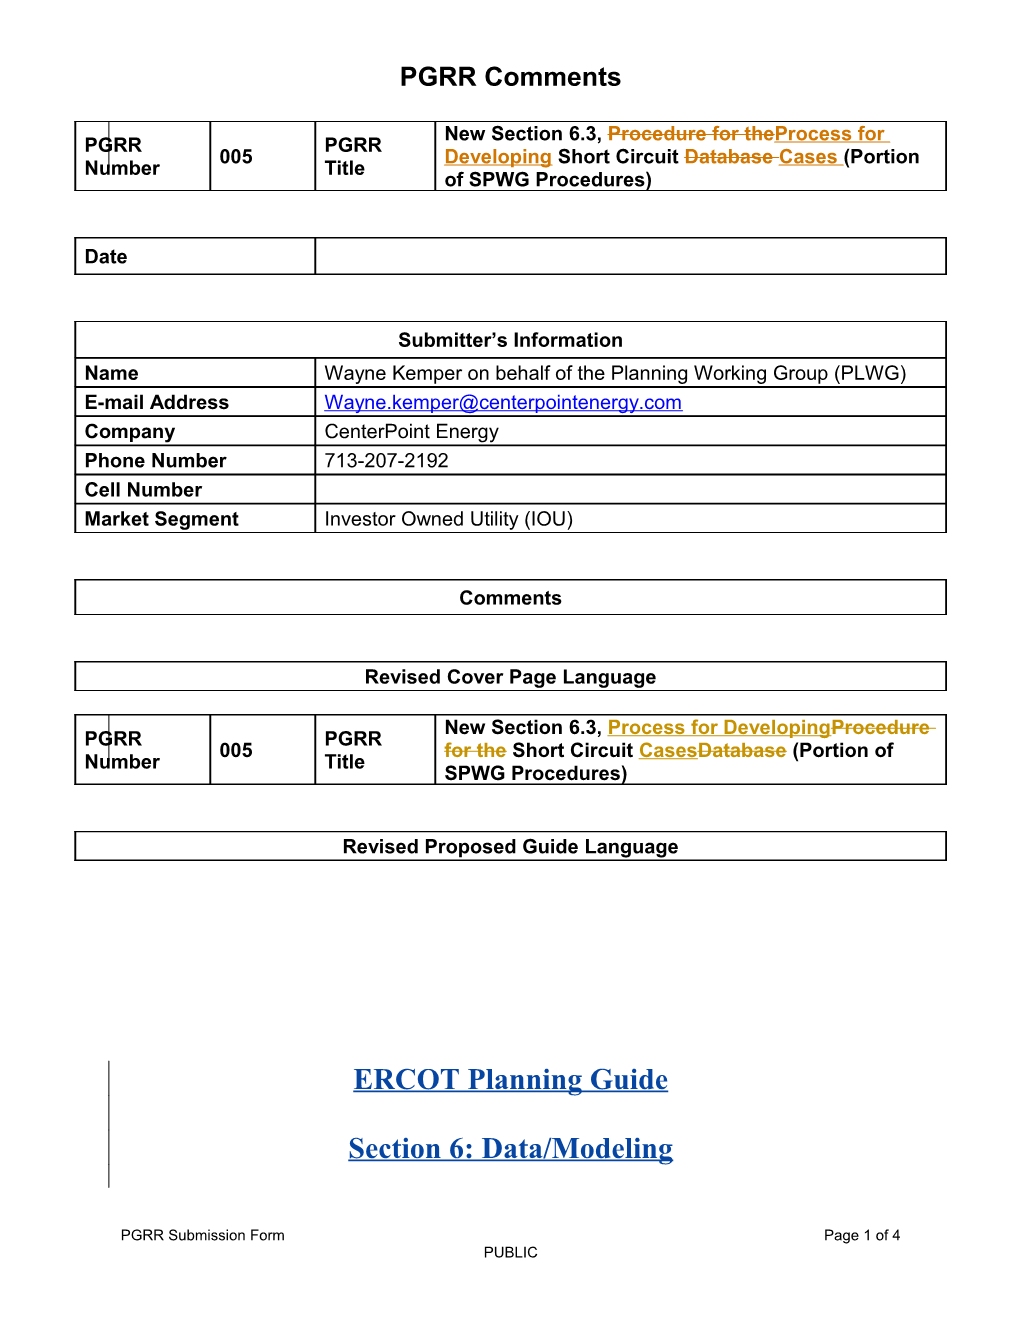 ERCOT Planning Guide